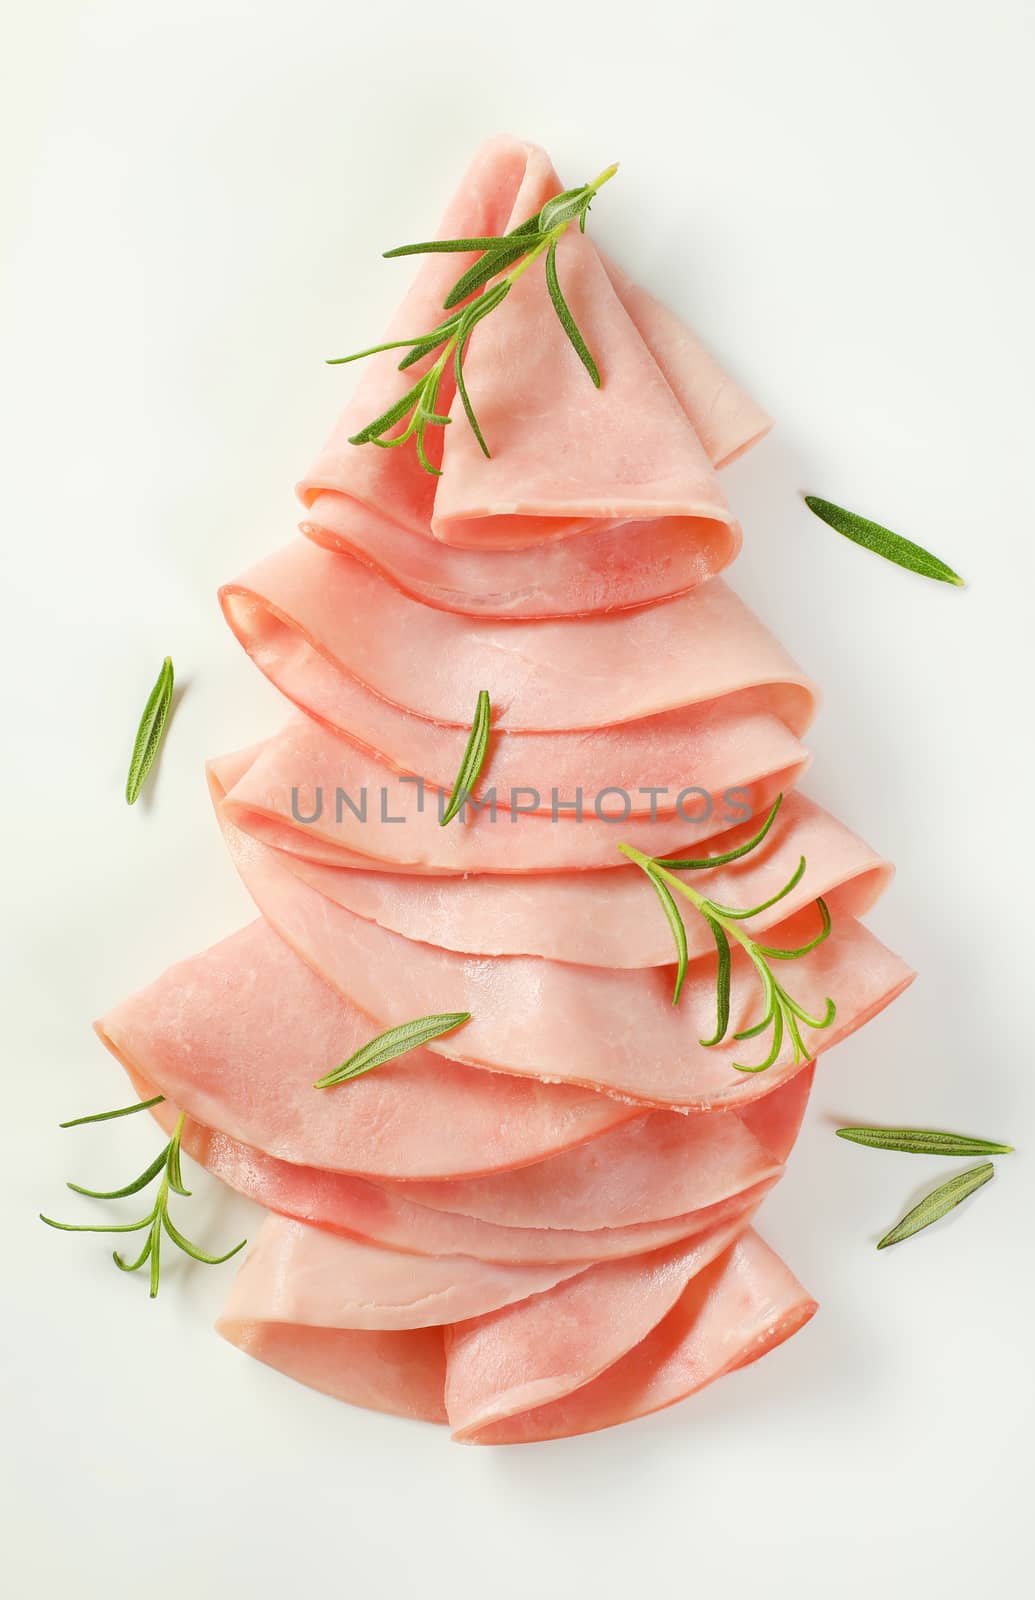 thin slices of ham with fresh rosemary leaves on white background